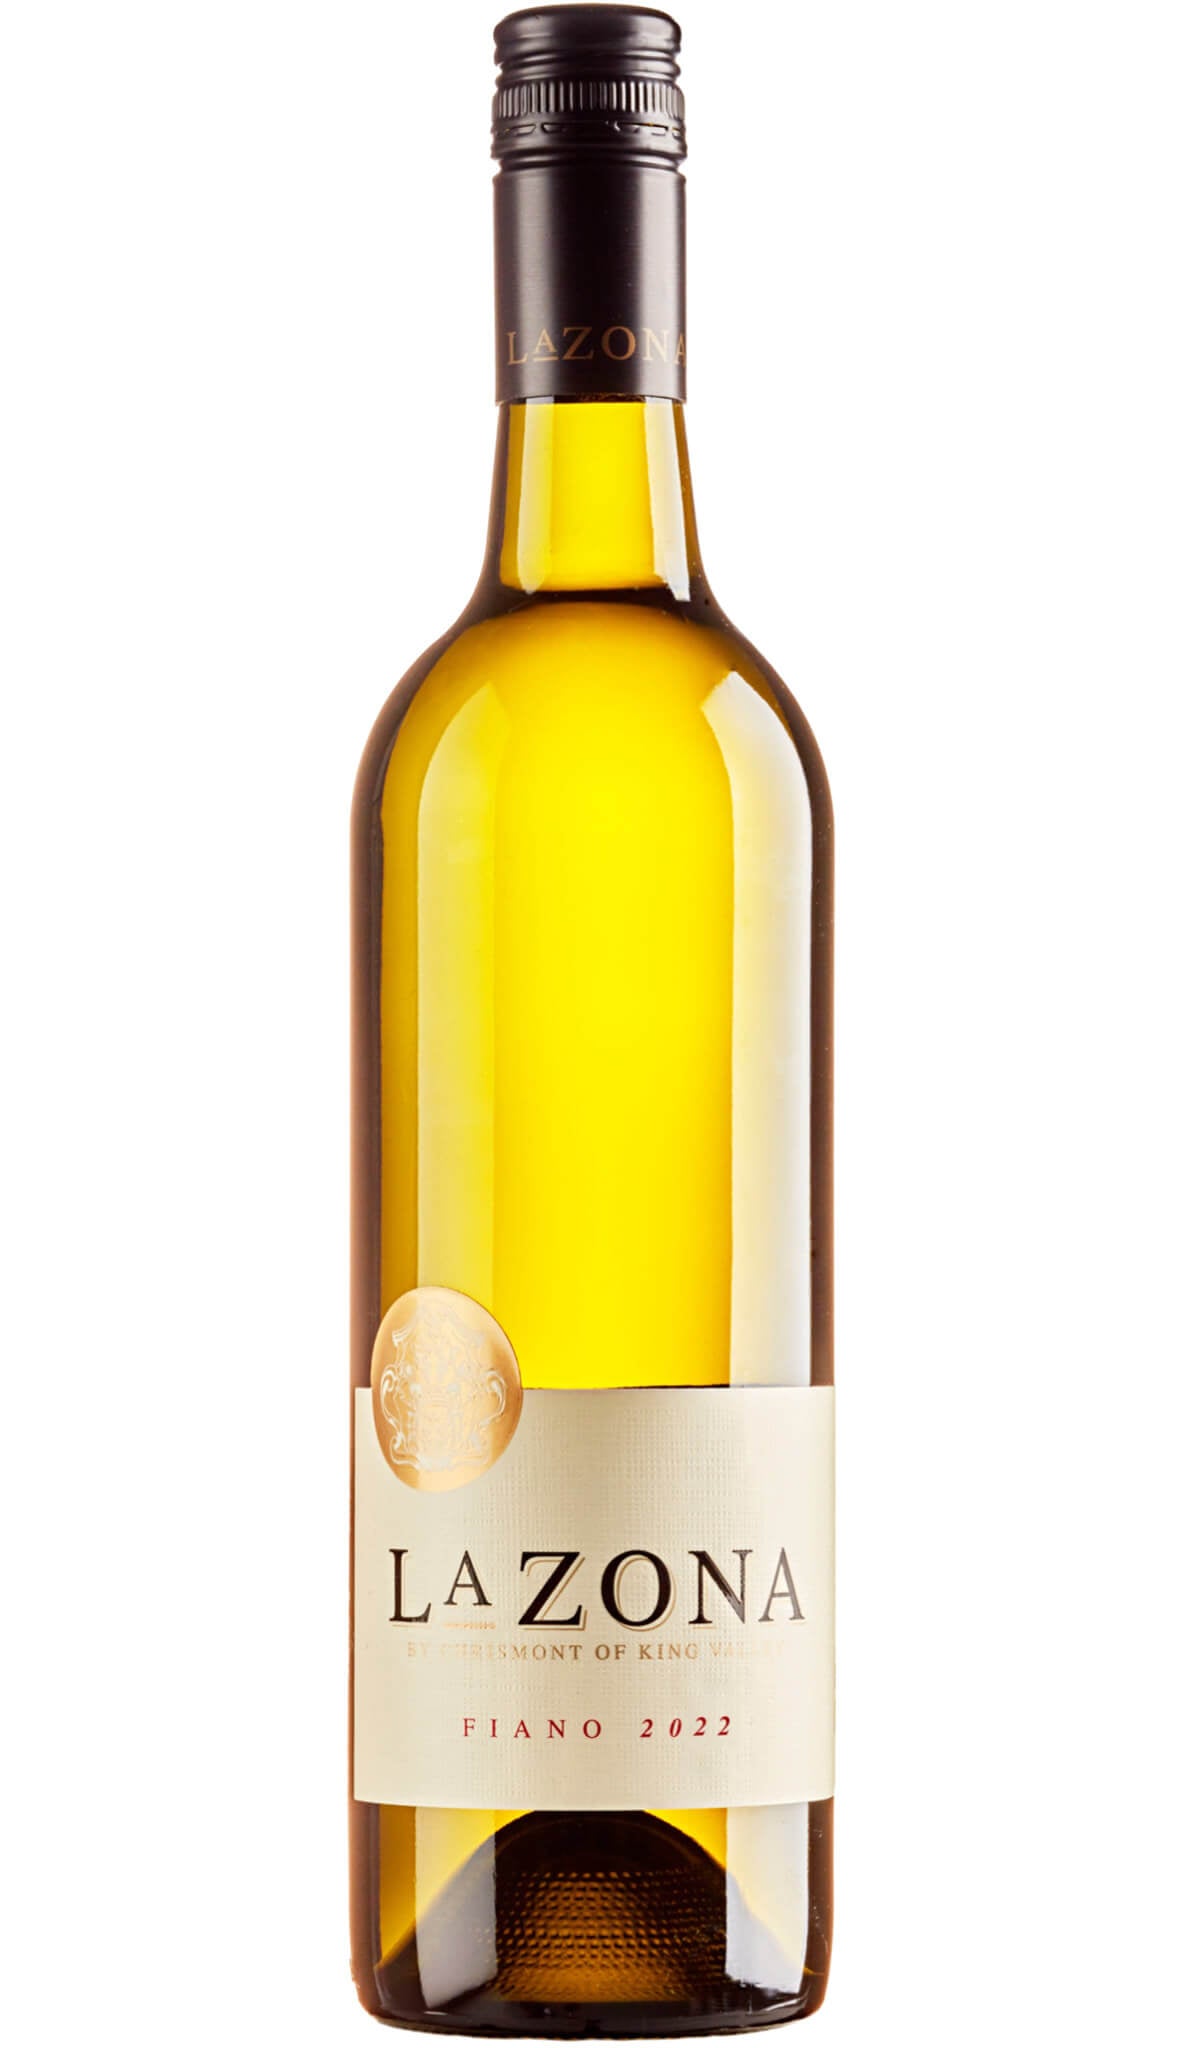 Find out more or buy Chrismont King Valley La Zona Fiano 2022 online at Wine Sellers Direct - Australia’s independent liquor specialists.